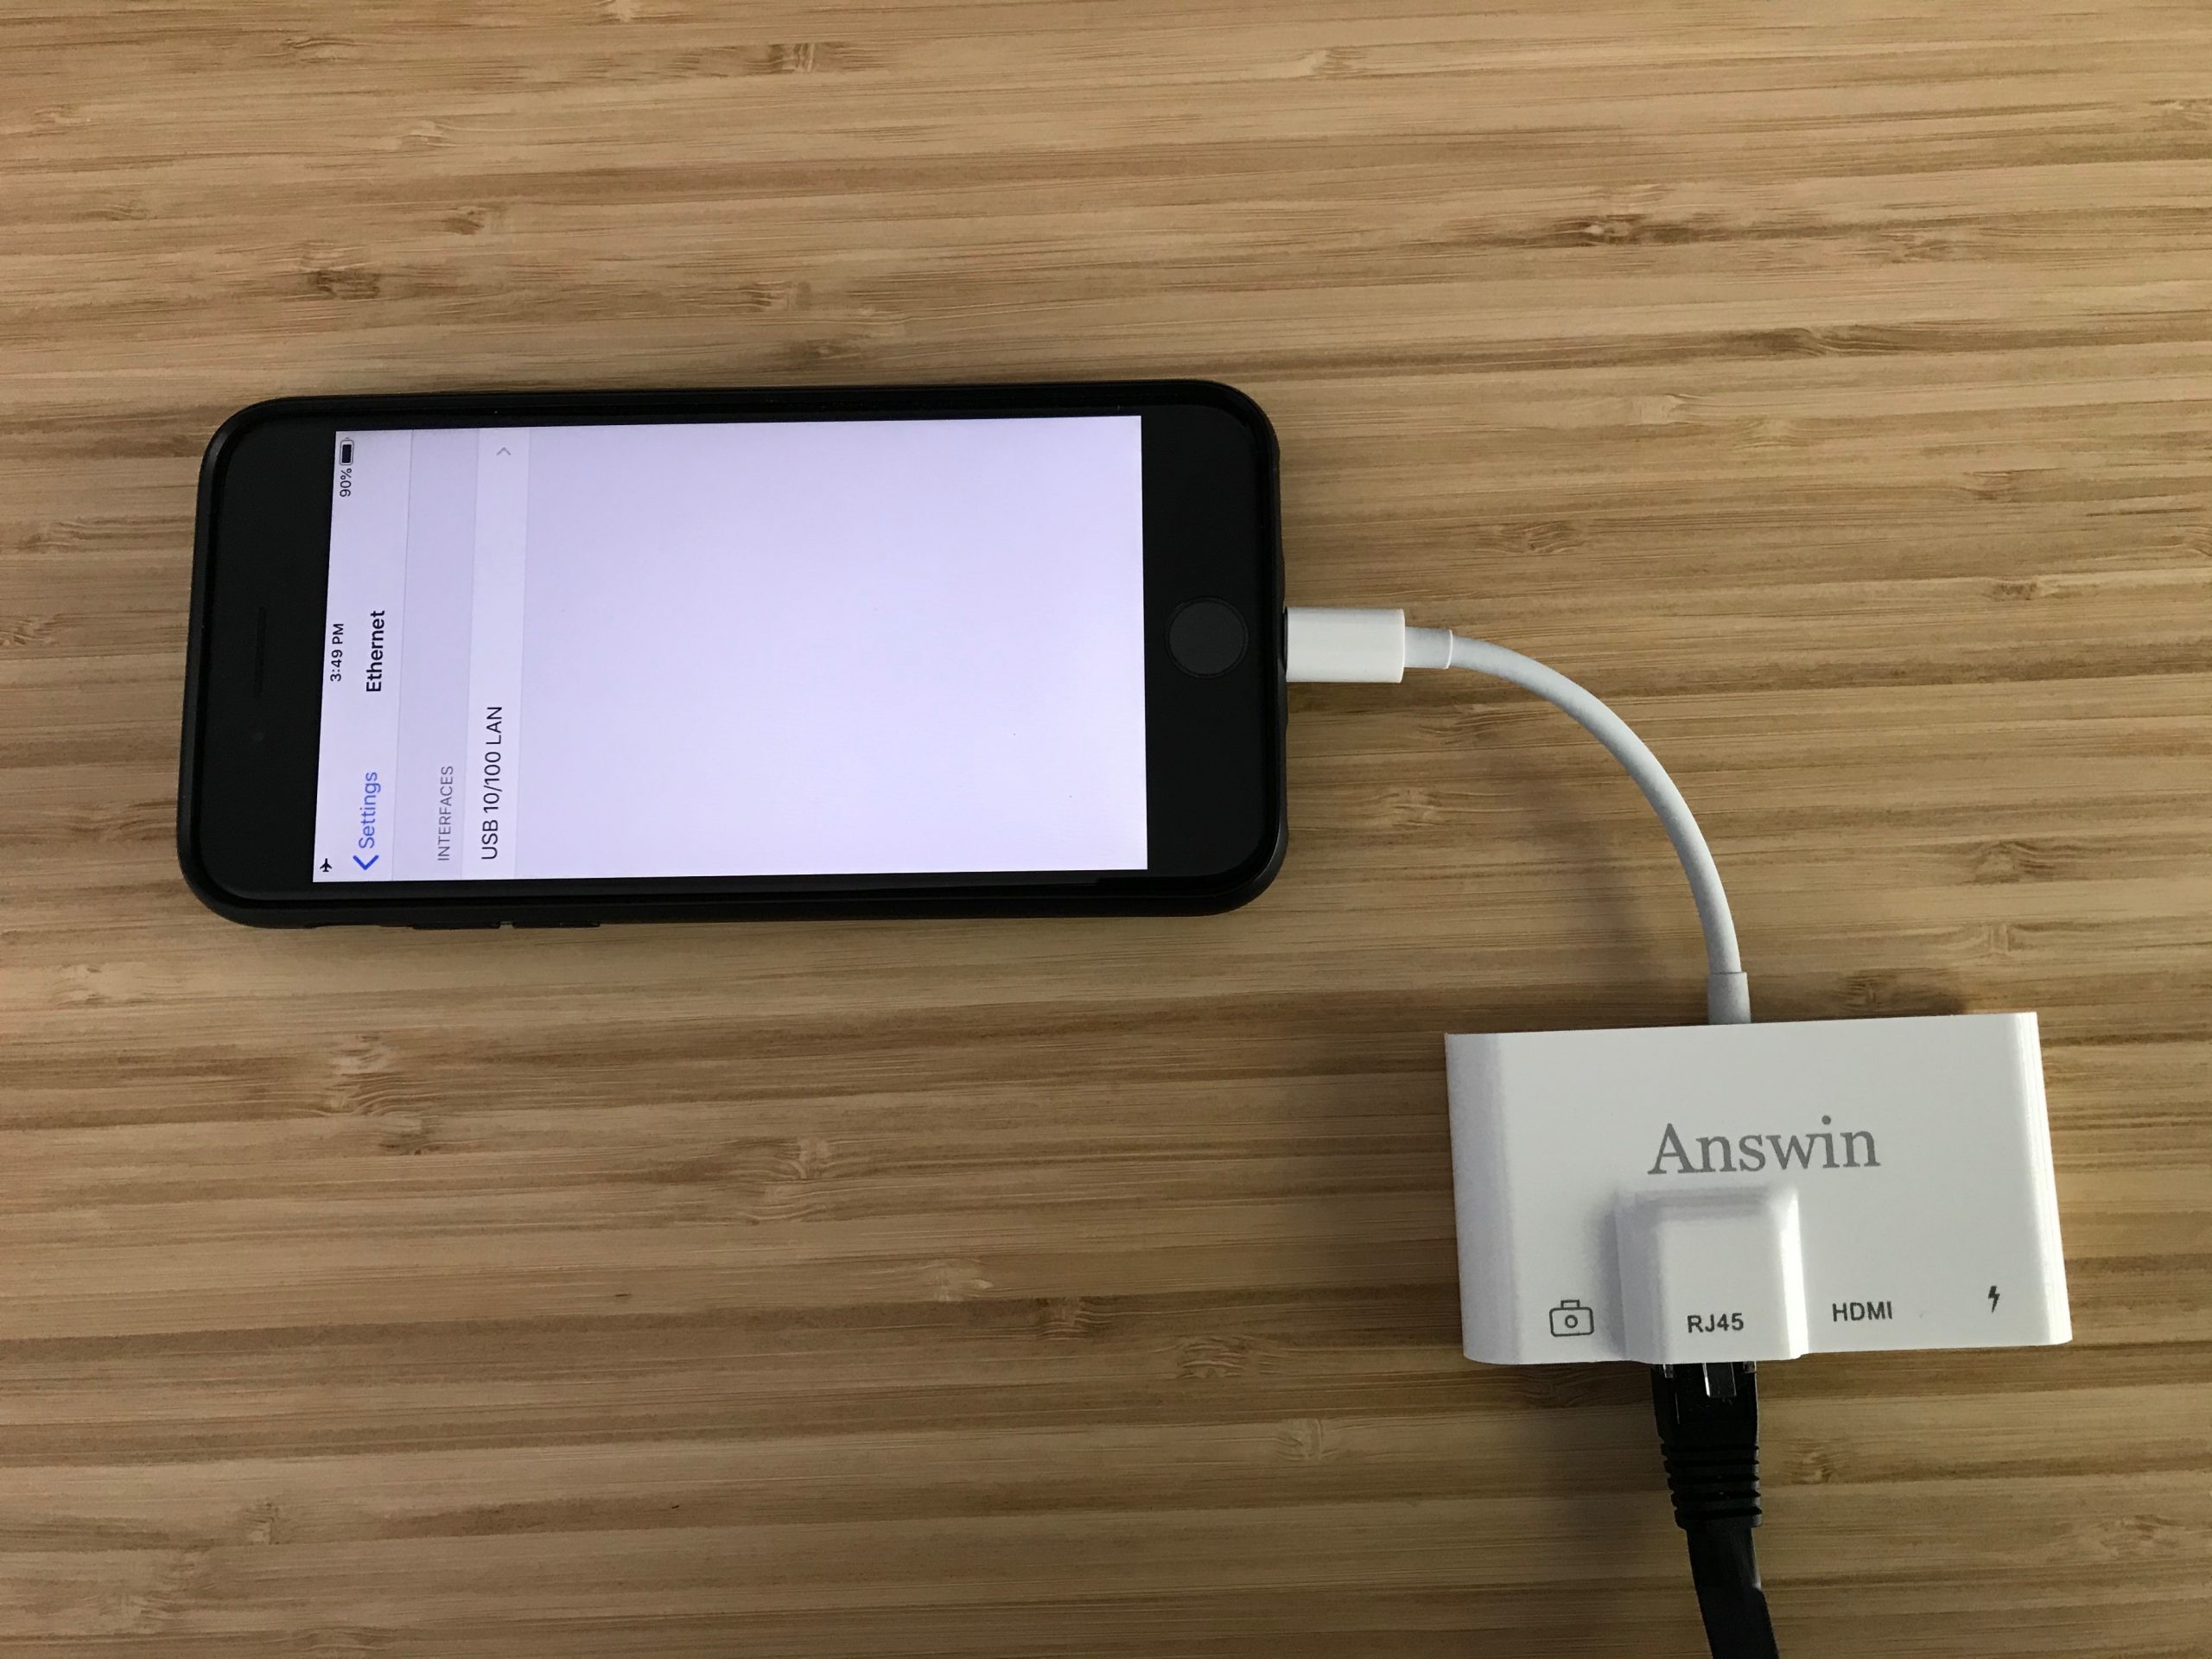 Colapso rechazo heroína How to Wire an iPad/iPhone via Ethernet - Everything You Need to Know